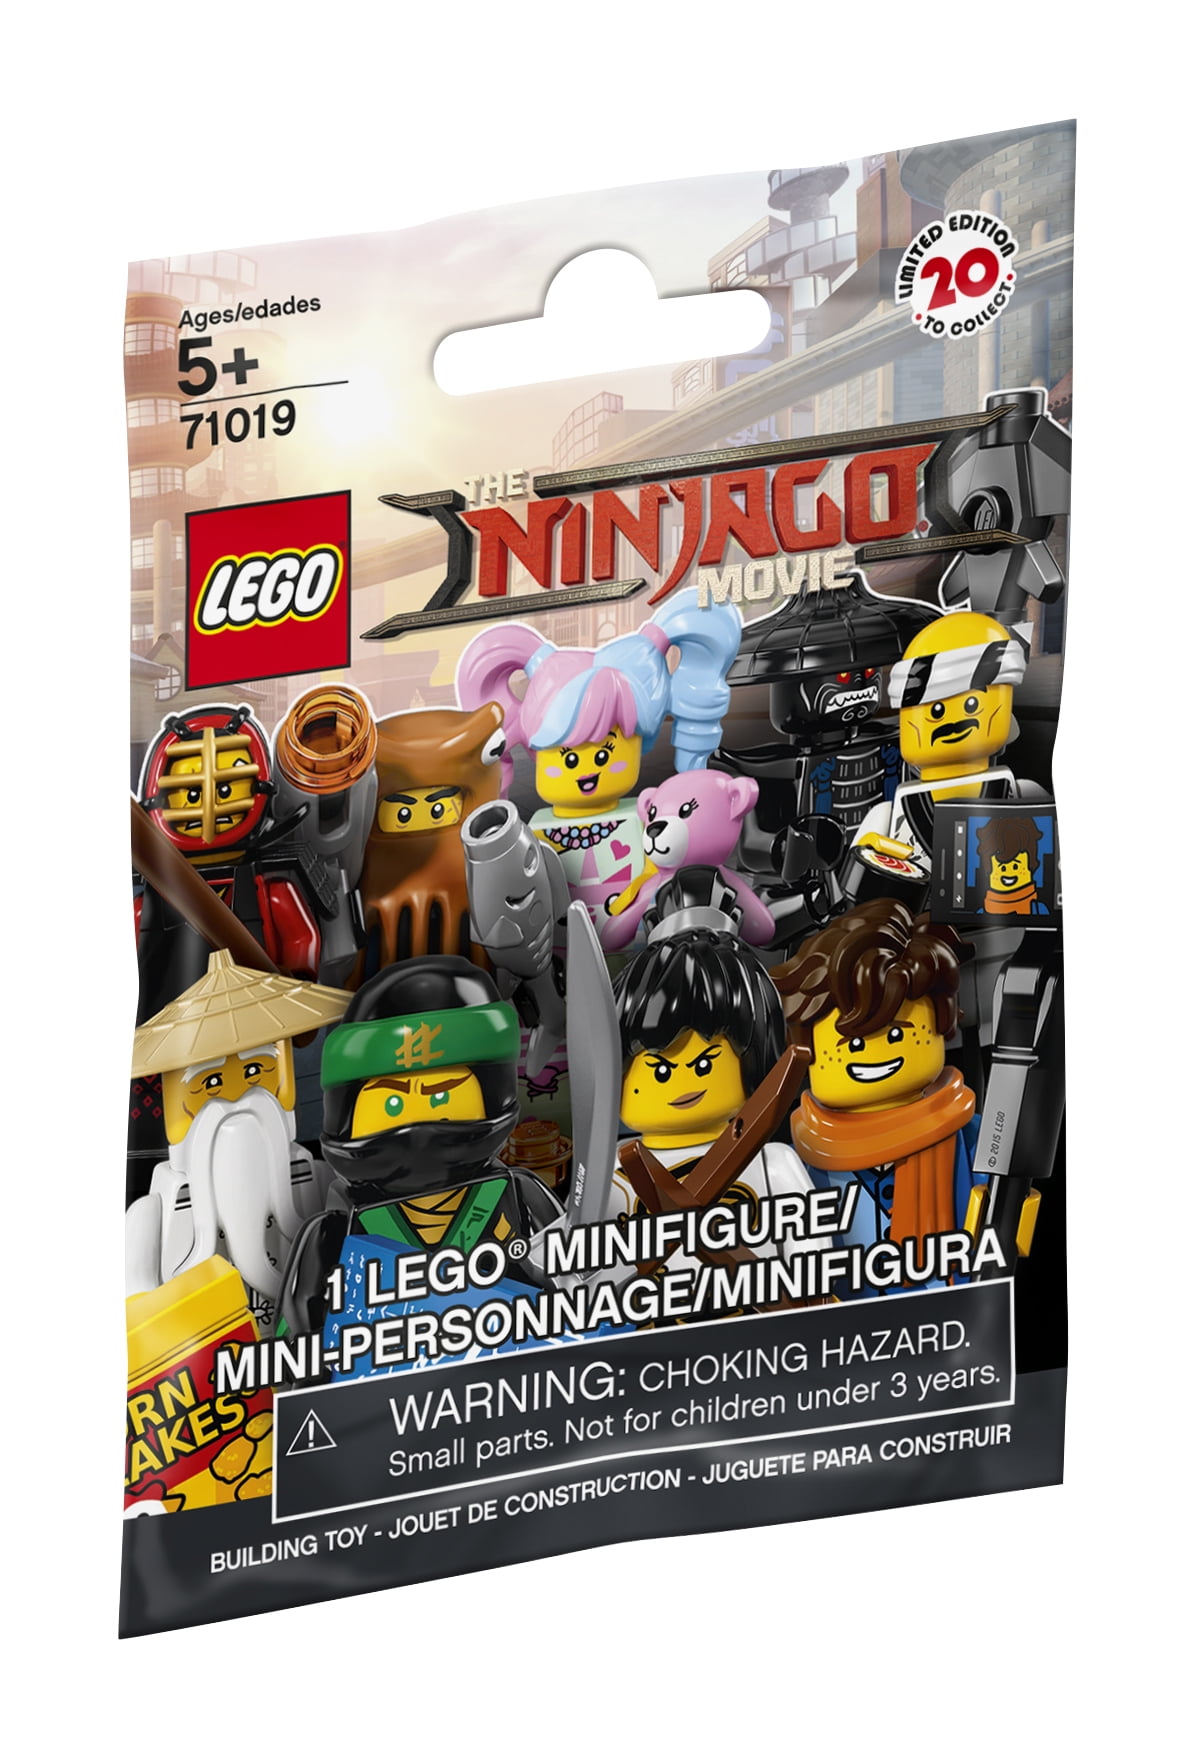 LEGO Minifigures Series 18 71021 new pick choose your own BUY 3 GET 4TH FREE 